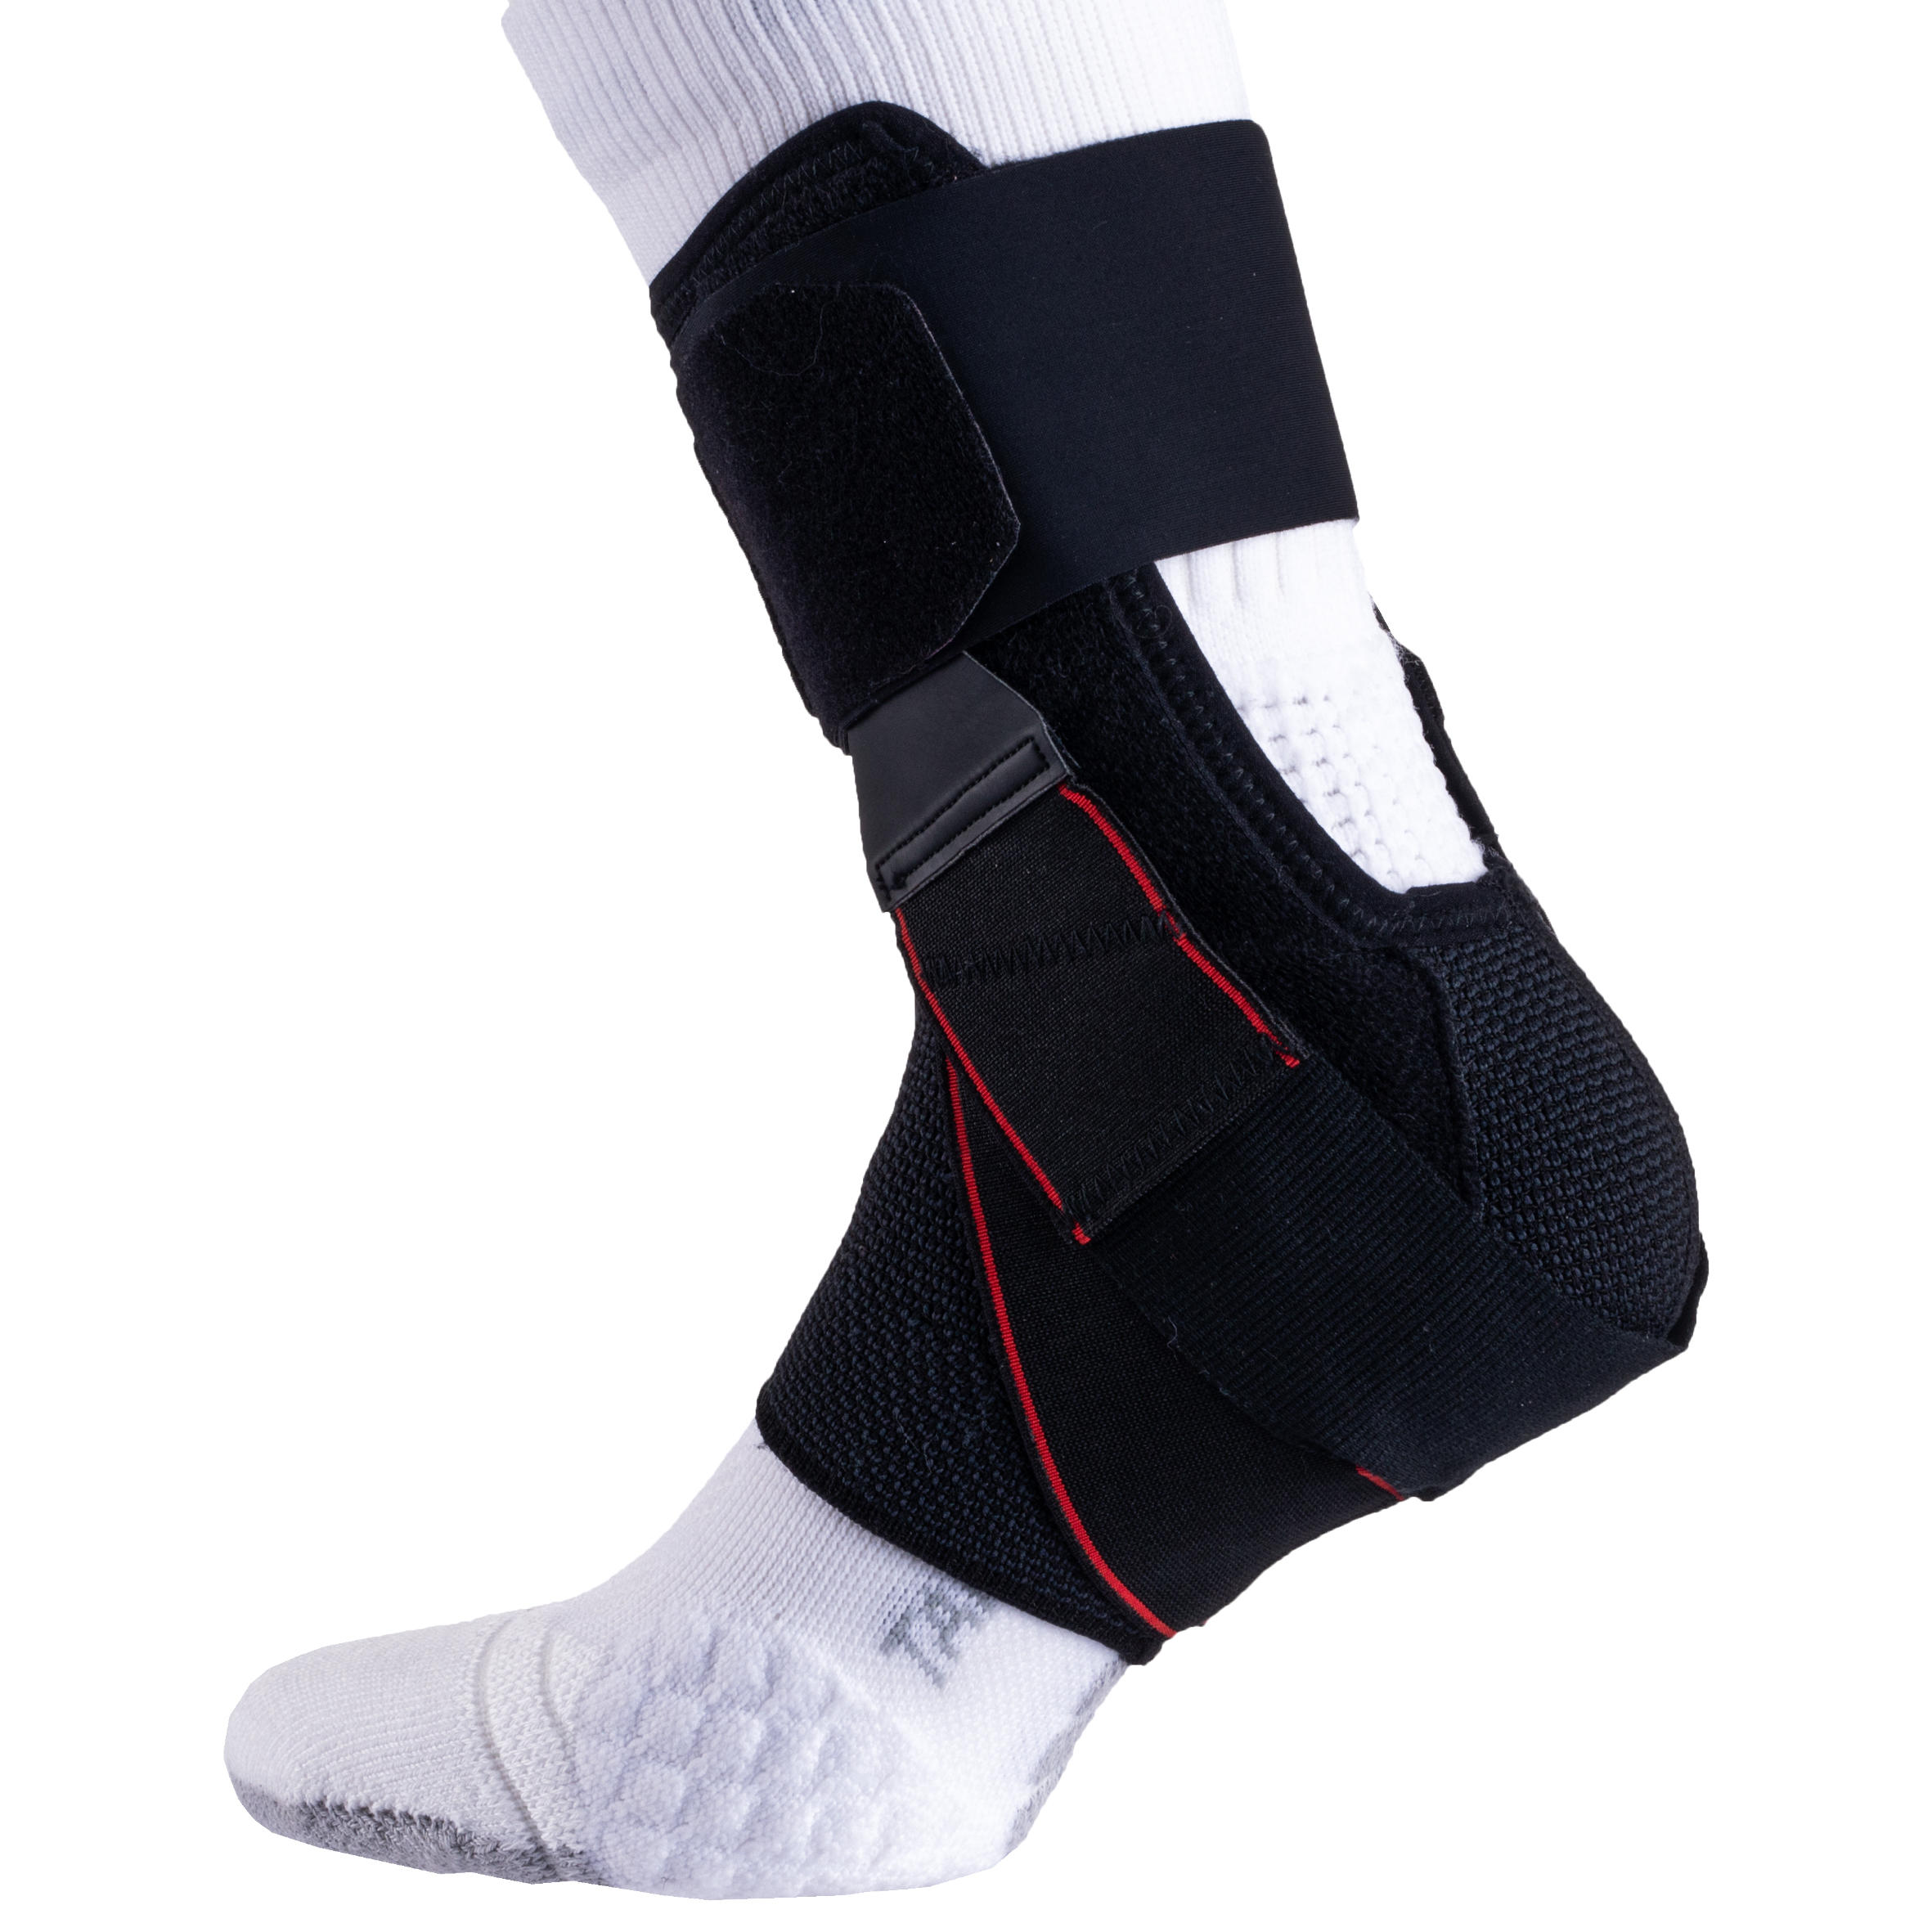 Strong 500 Men's/Women's Right/Left Ankle Ligament Support - Black 7/7